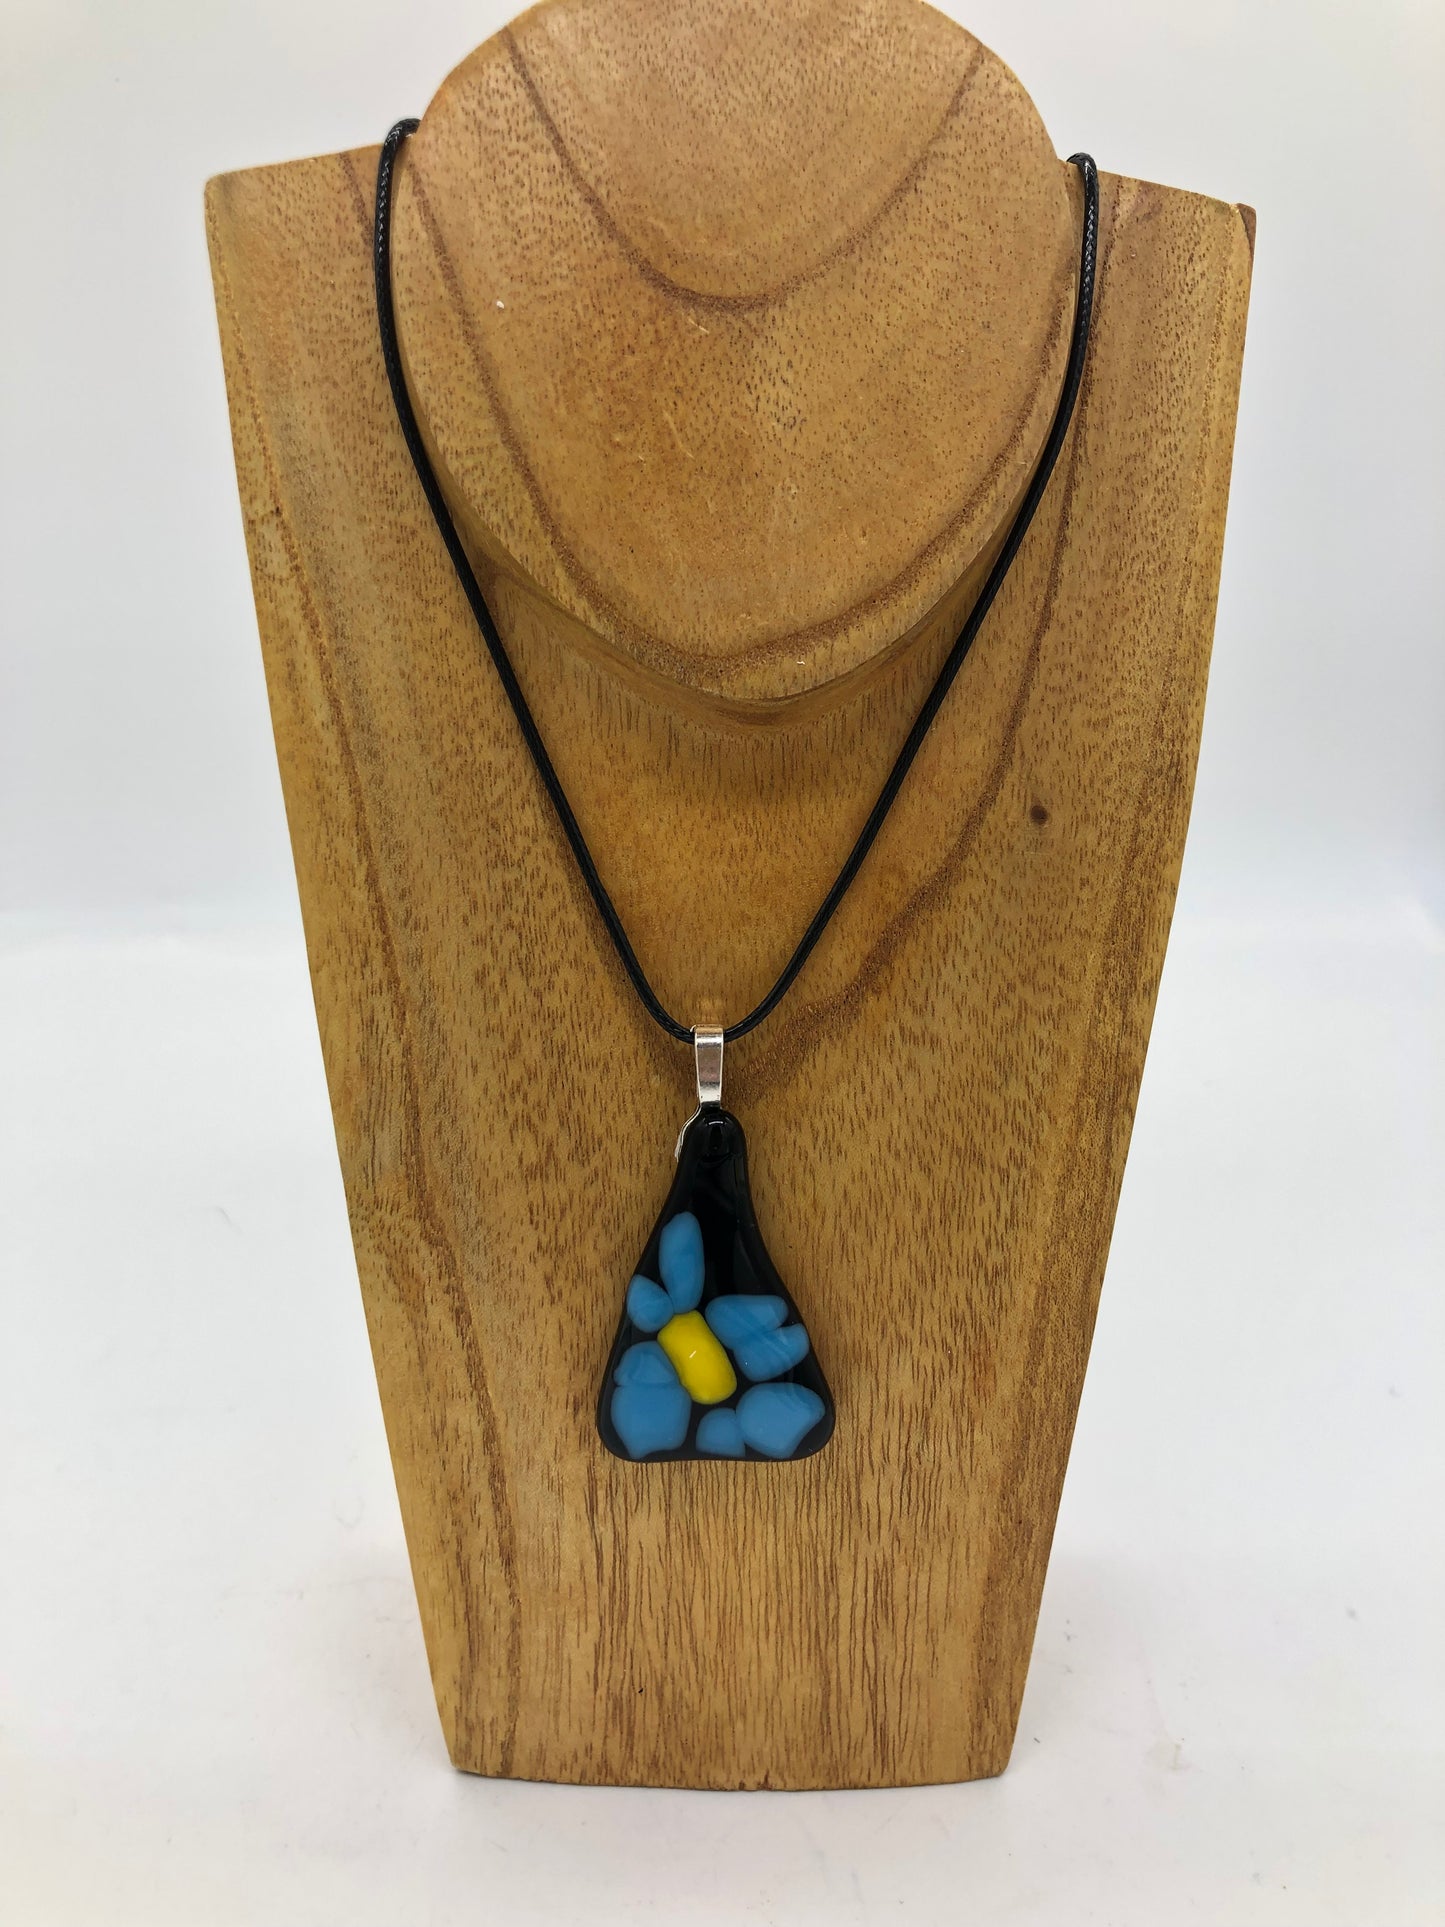 Fused glass necklace on a black cord, displaced on wooden holder.  Necklace design is a black triangle with blue petaled flower with yellow center.